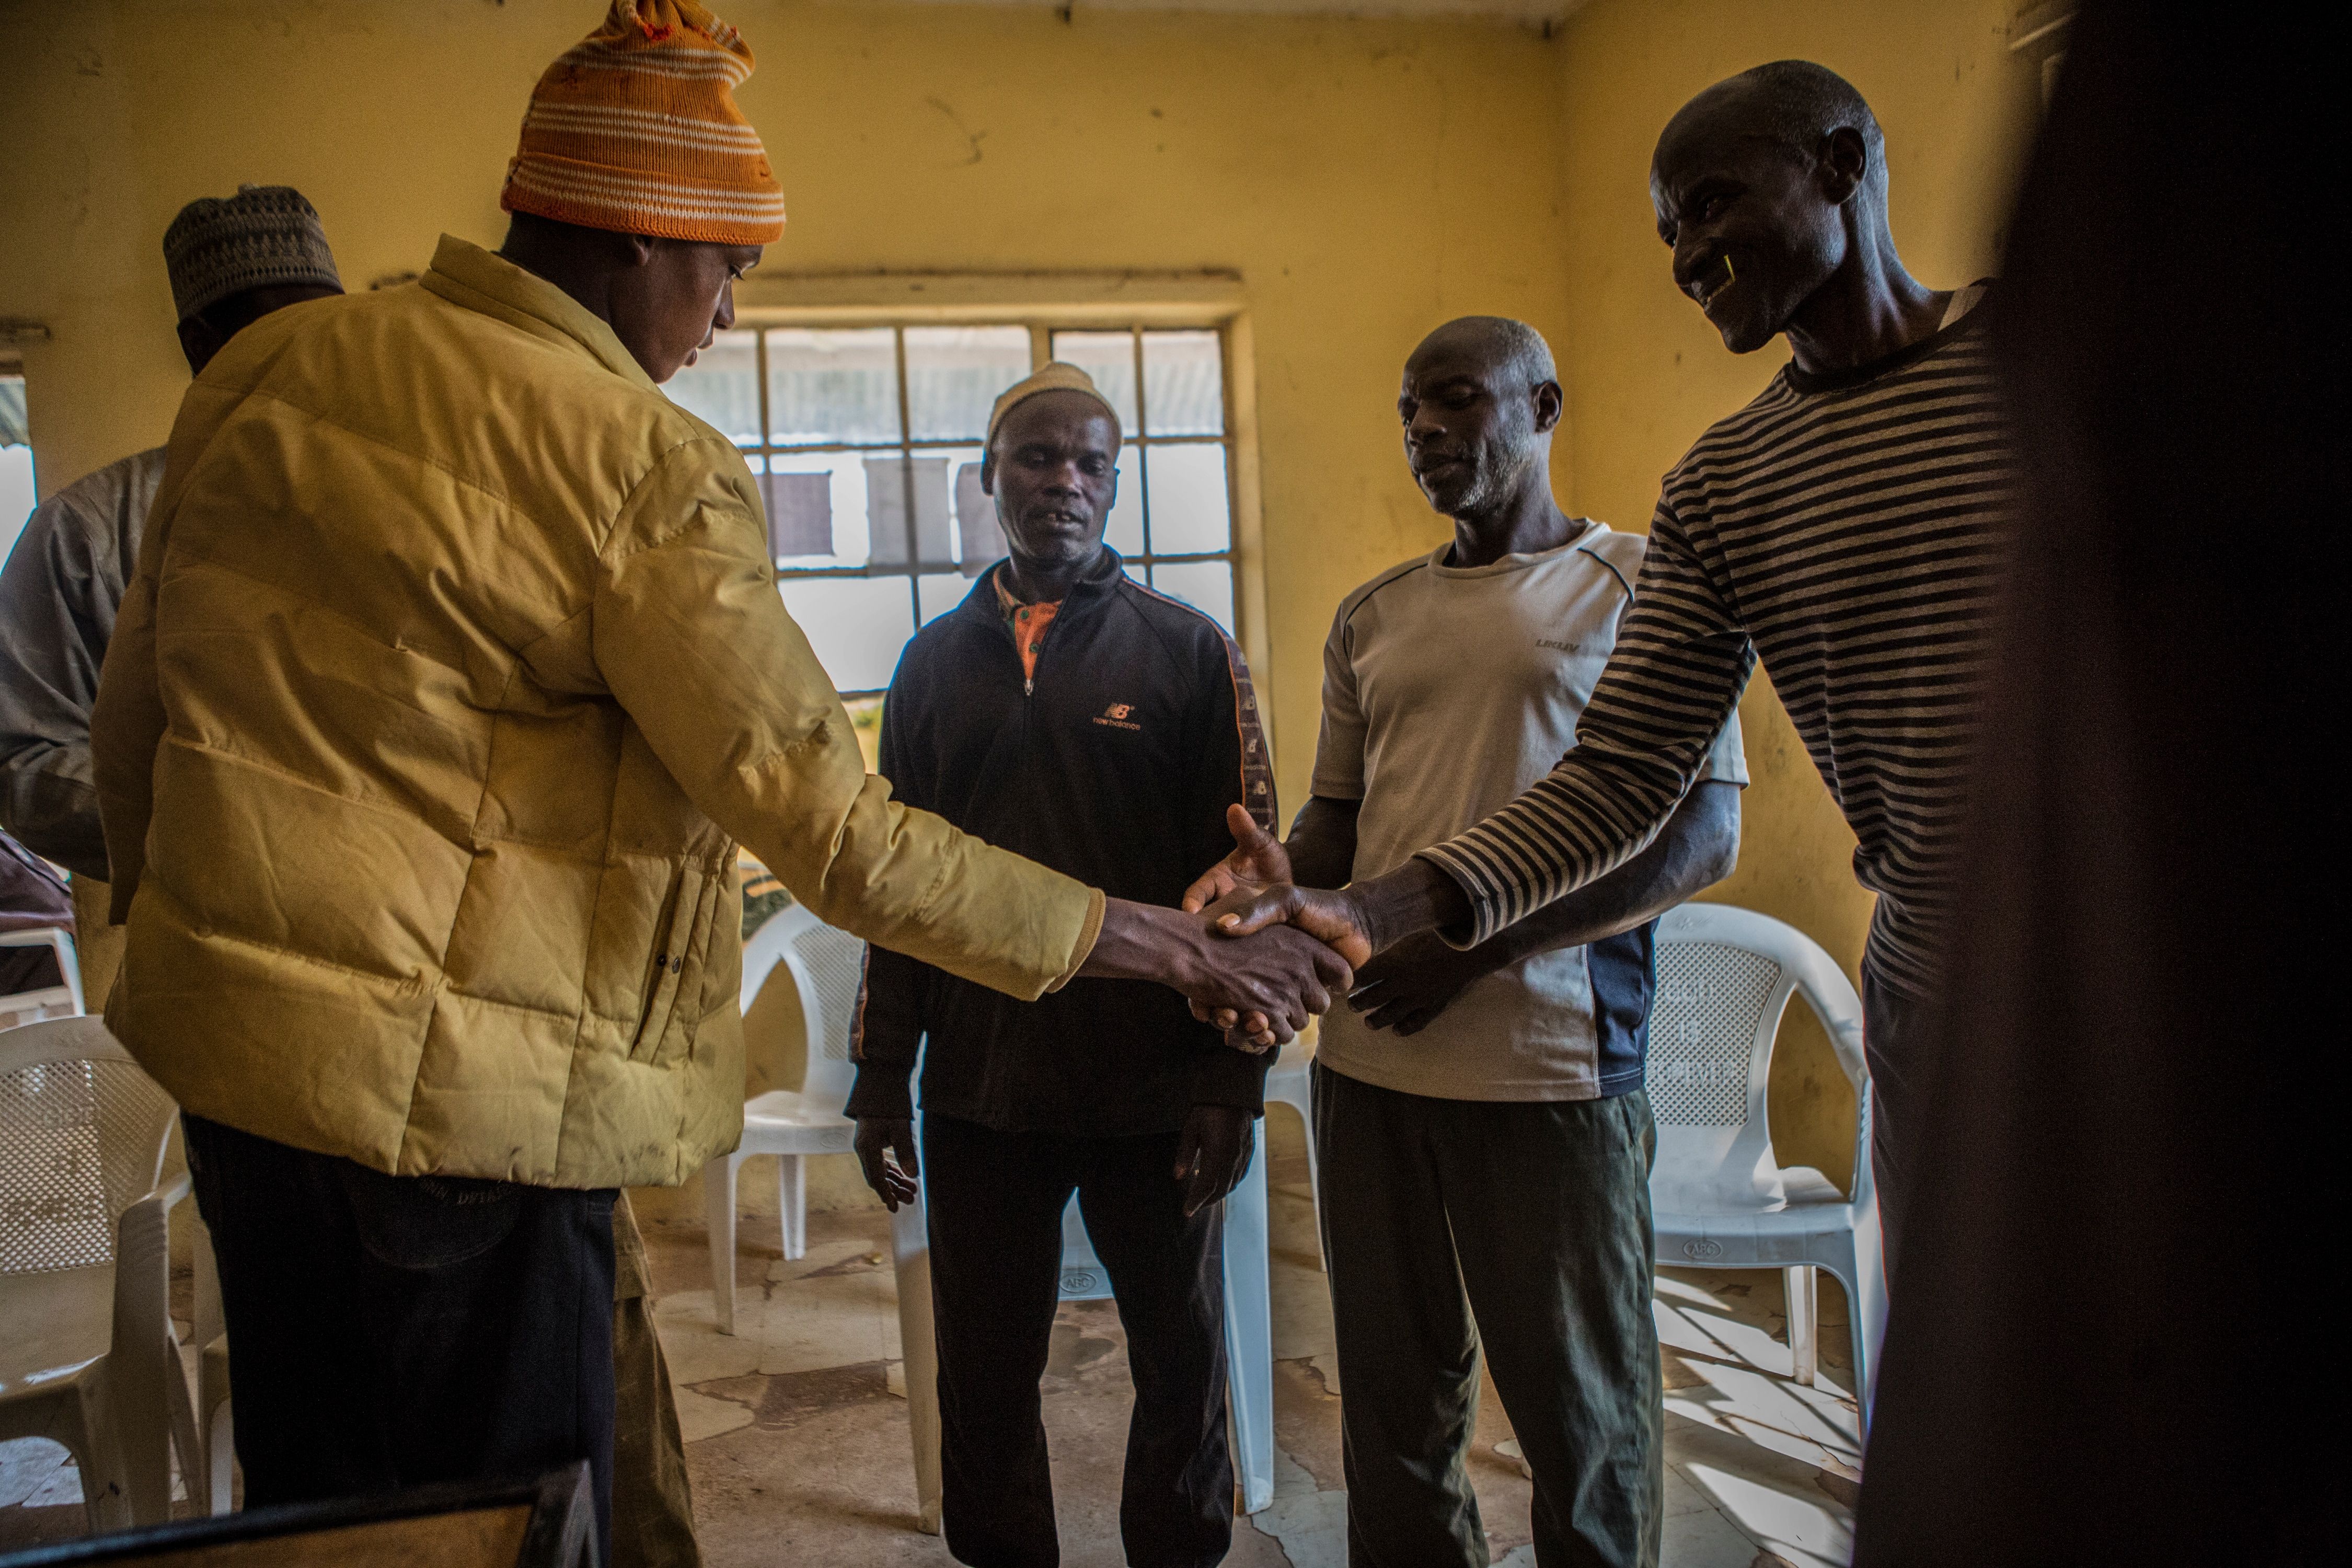 Cattle herder Muhammad Yusuf, 20, left, shakes hands with farmer Amos Lenji in Barkin Ladi in October as volunteer peacekeepers mediate a dispute about cattle intruding on farmland. Yusuf took responsibility for another herder whose cattle had trampled Lenji’s crops. Image by Jane Hahn. Nigeria, 2018.